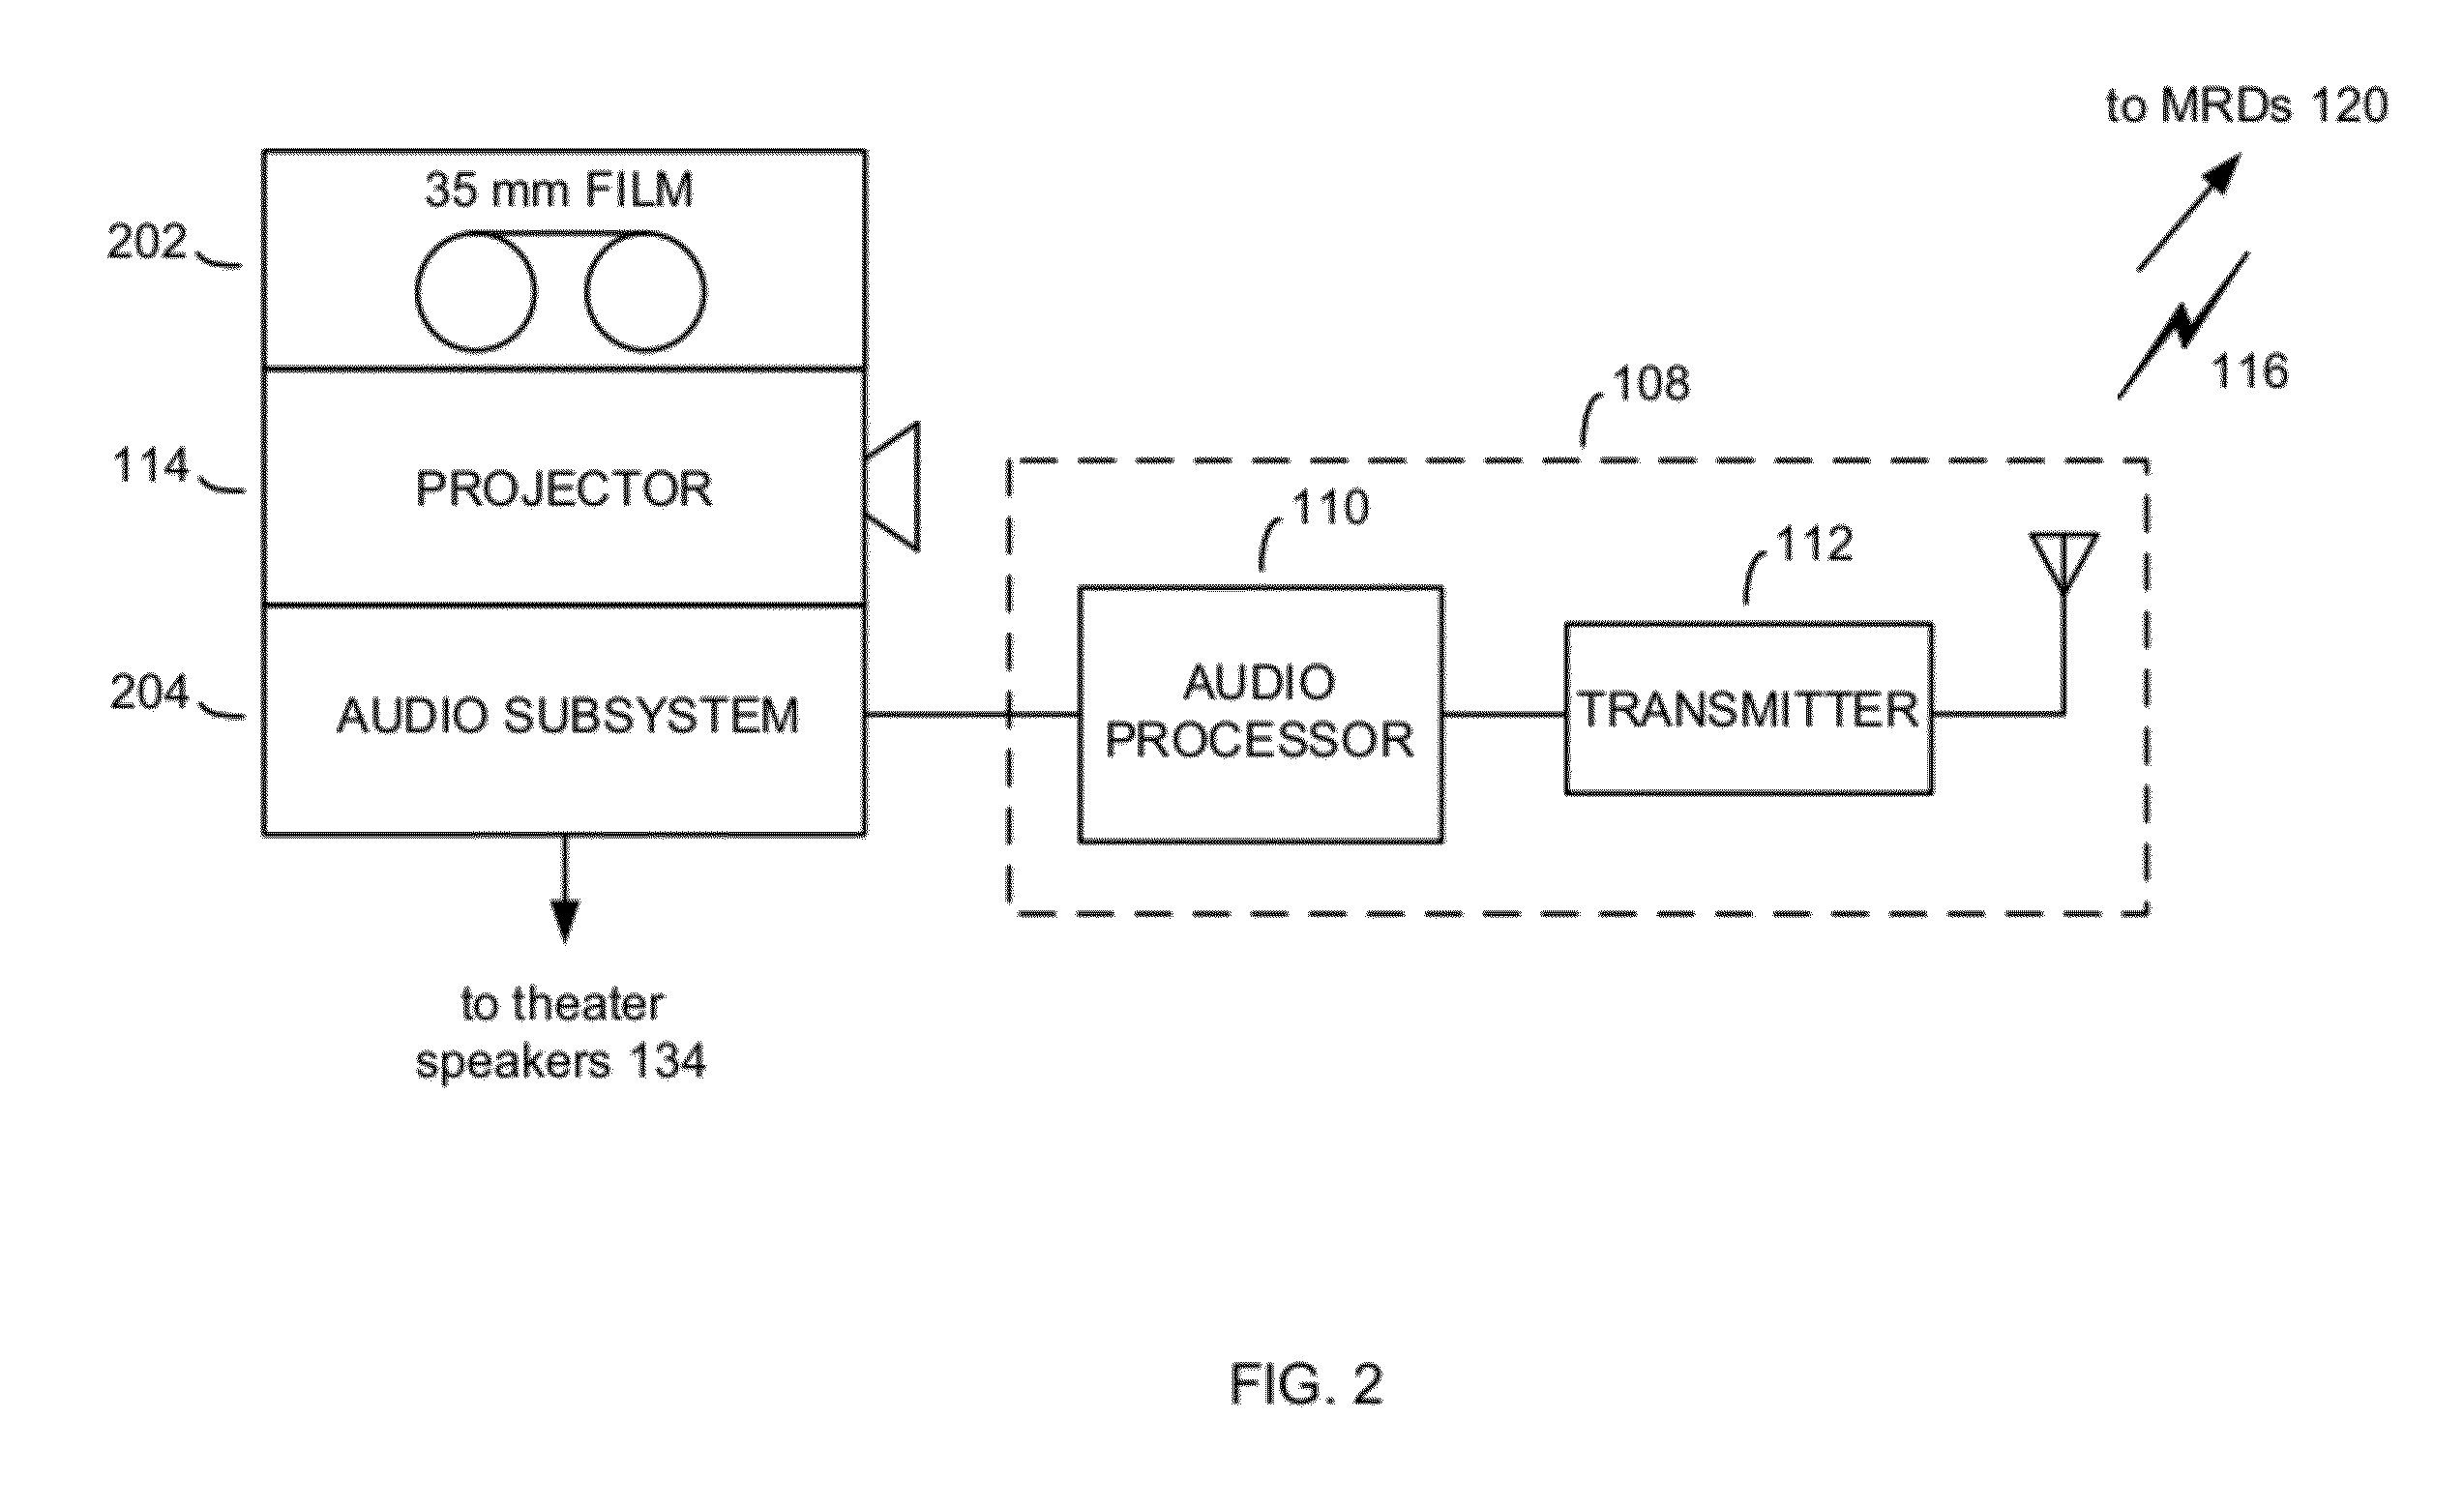 Multi-functional audio distribution system and method for movie theaters and other public and private venues